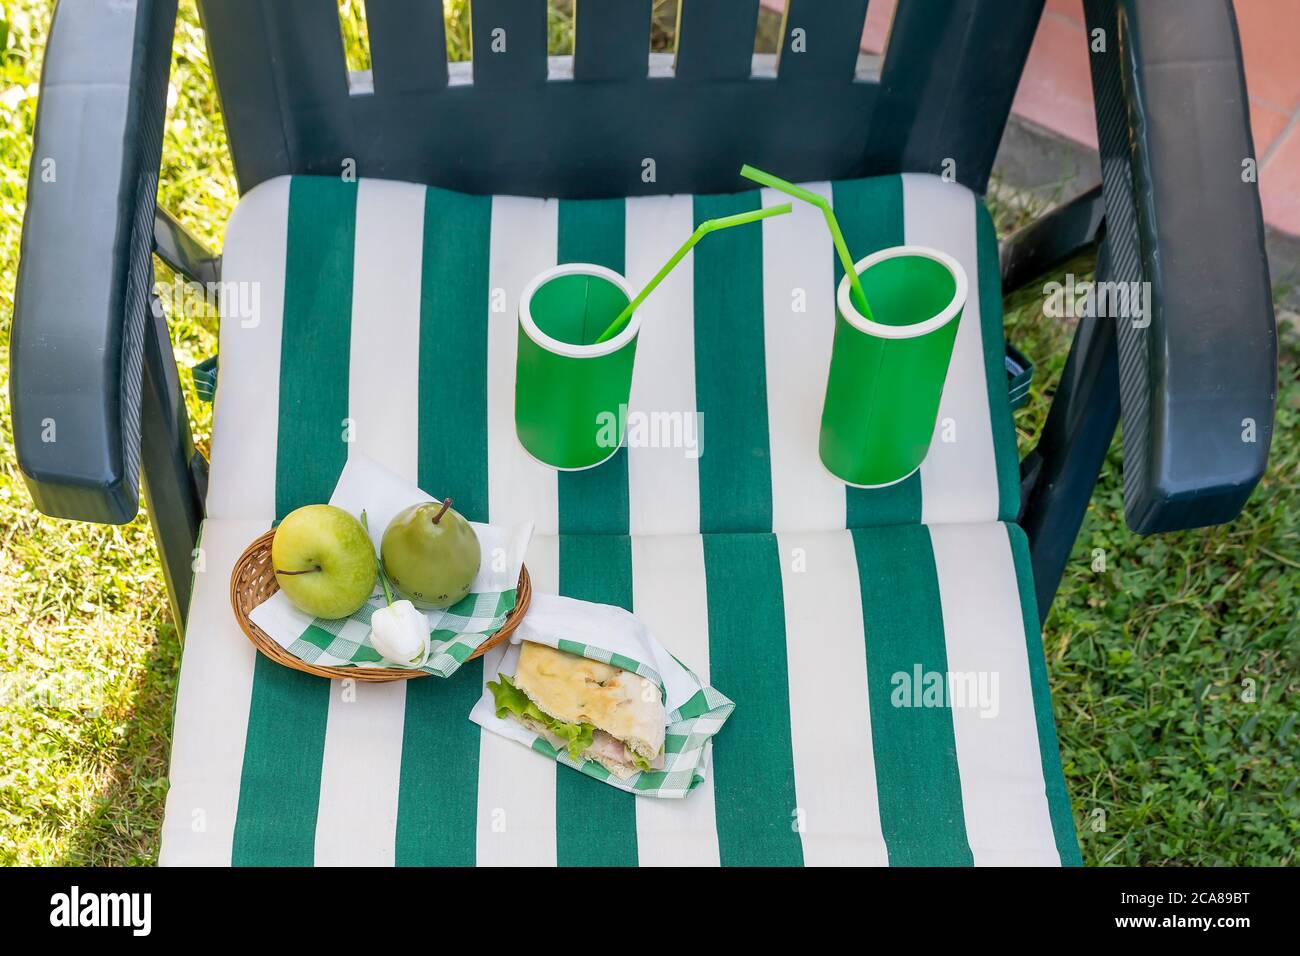 Picnic composition in green shades of sunbed with white and green striped mattress, cooler with straws, sandwich and fruit Stock Photo